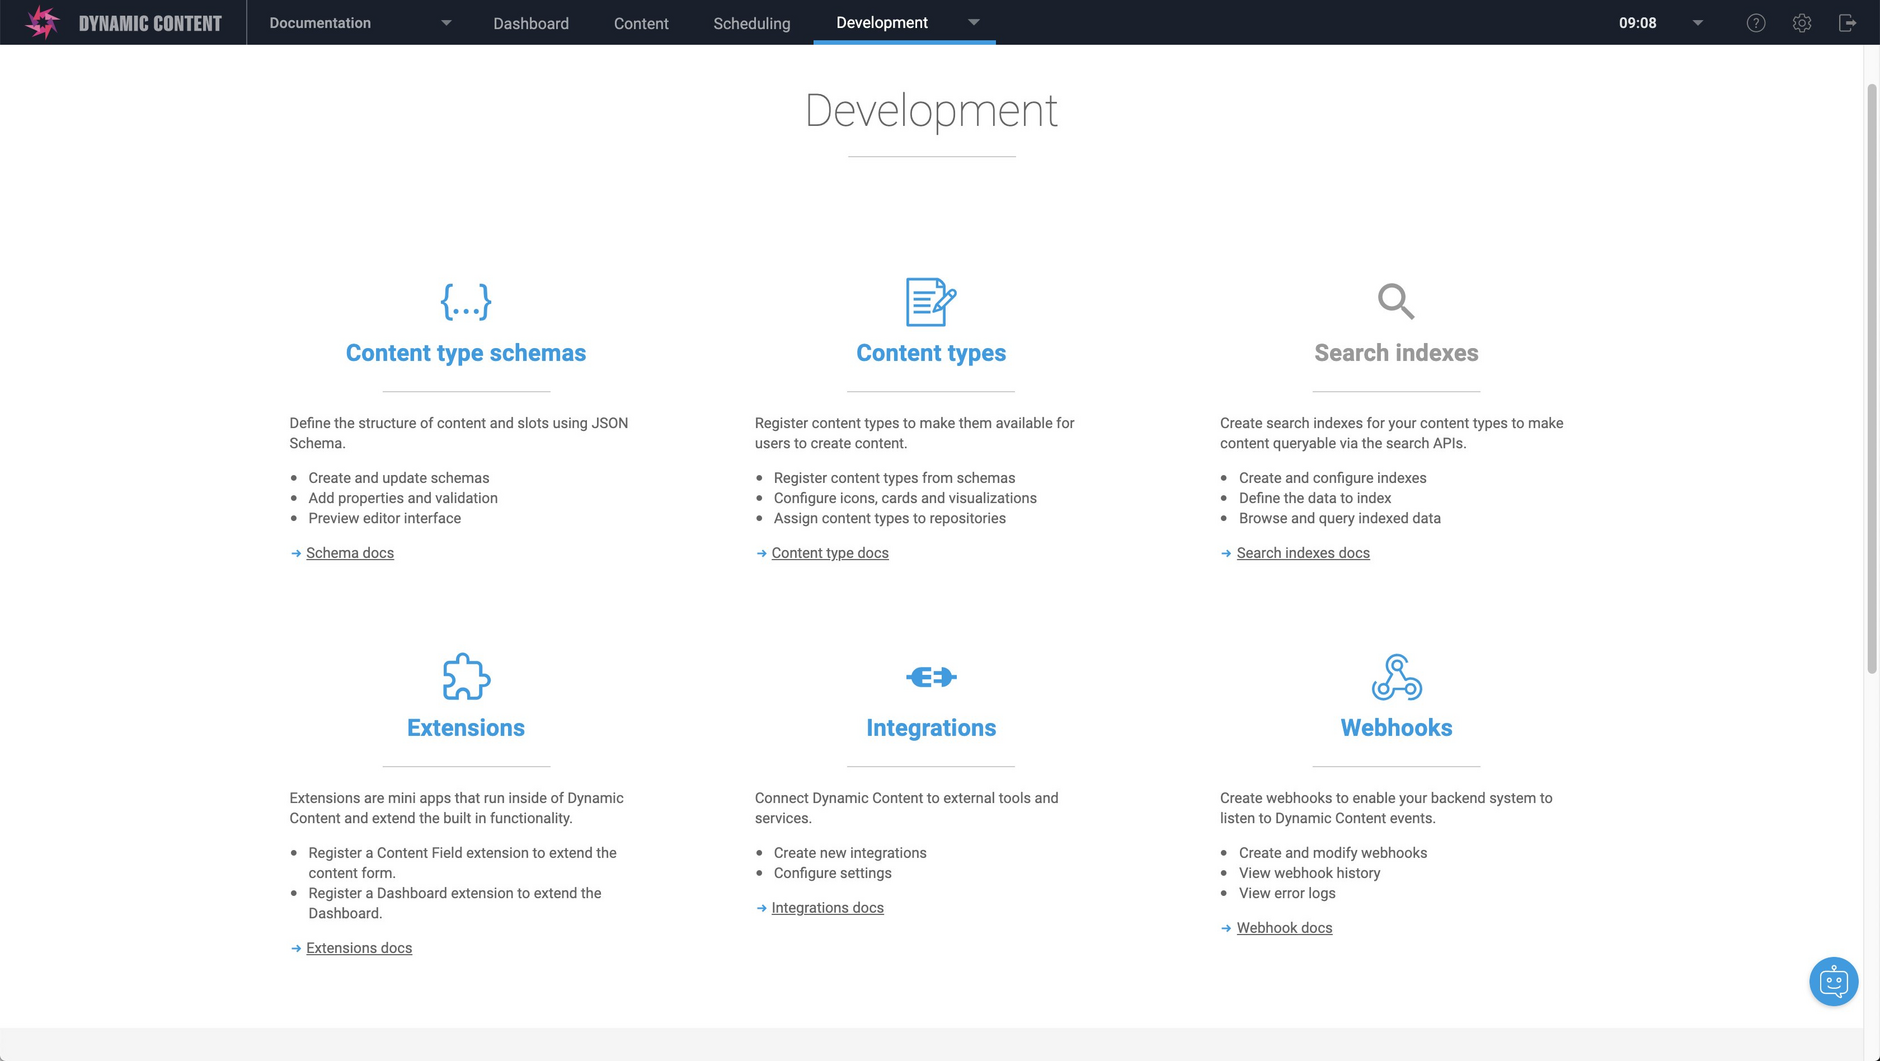 Users with a developer persona can create, edit and archive slots and access the features in the development tab